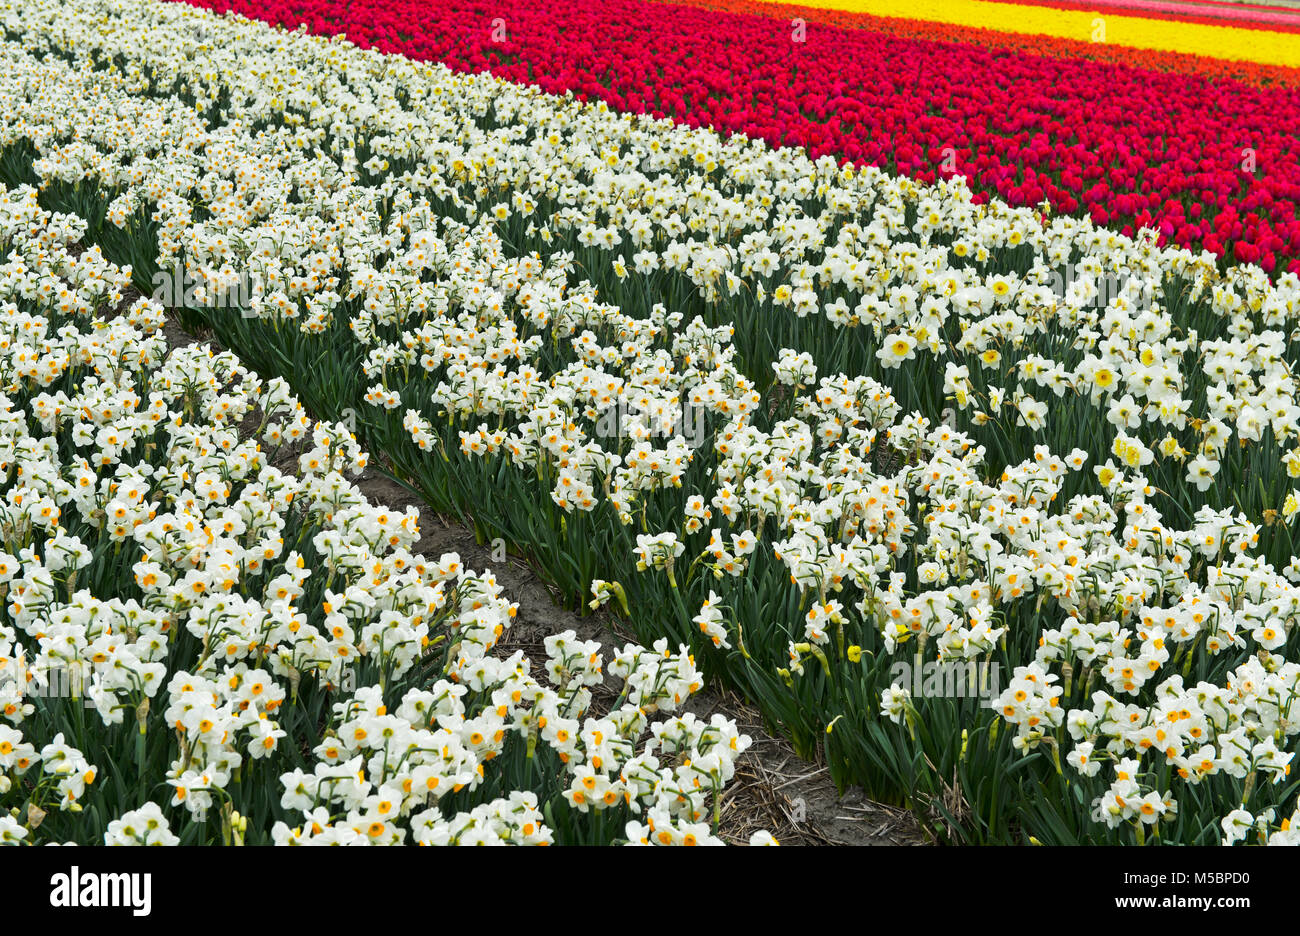 Cultivation of daffodils and tulips for the production of flower bulbs in the Bollenstreek area near Noordwijkerhout, Netherlands Stock Photo